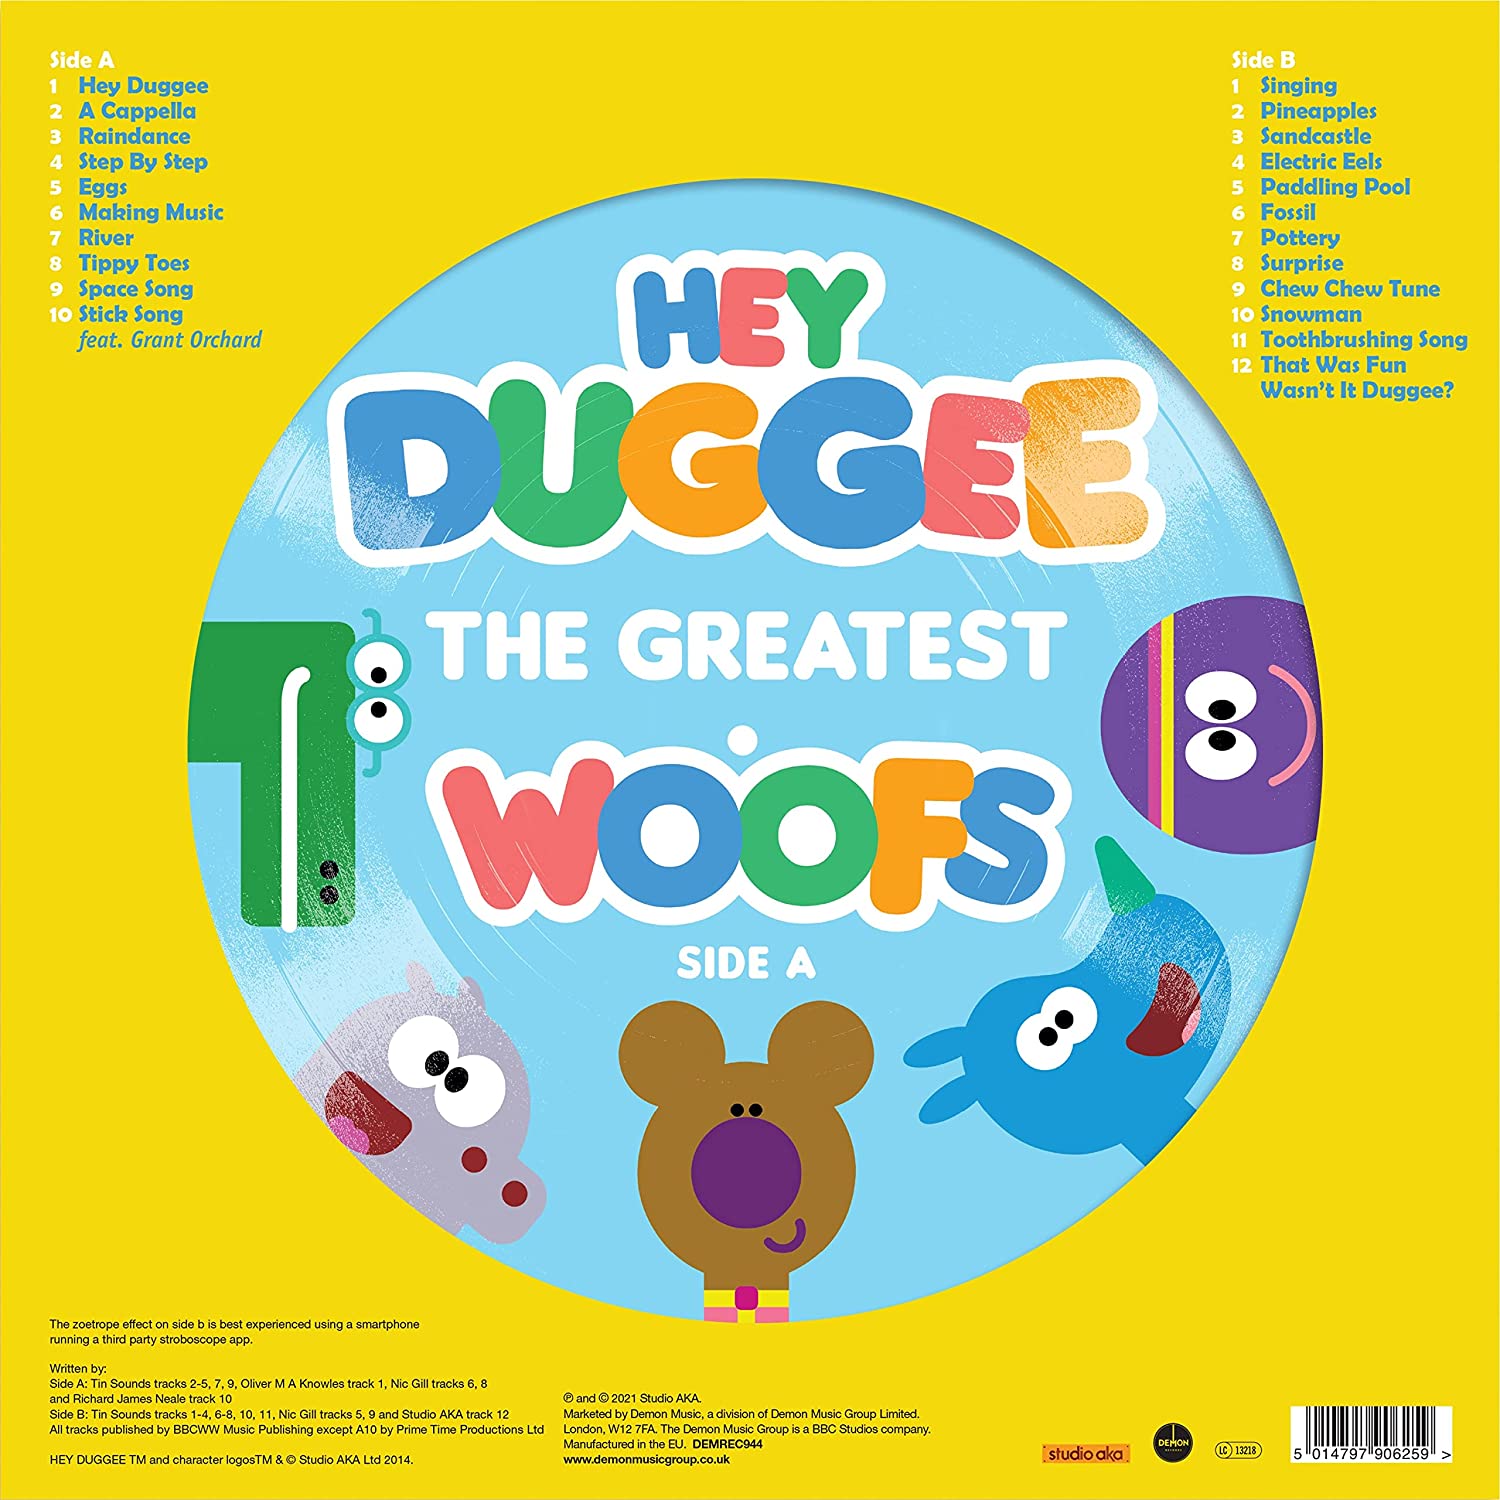 Hey Duggee - The Greatest Woofs: Picture Disc Vinyl LP